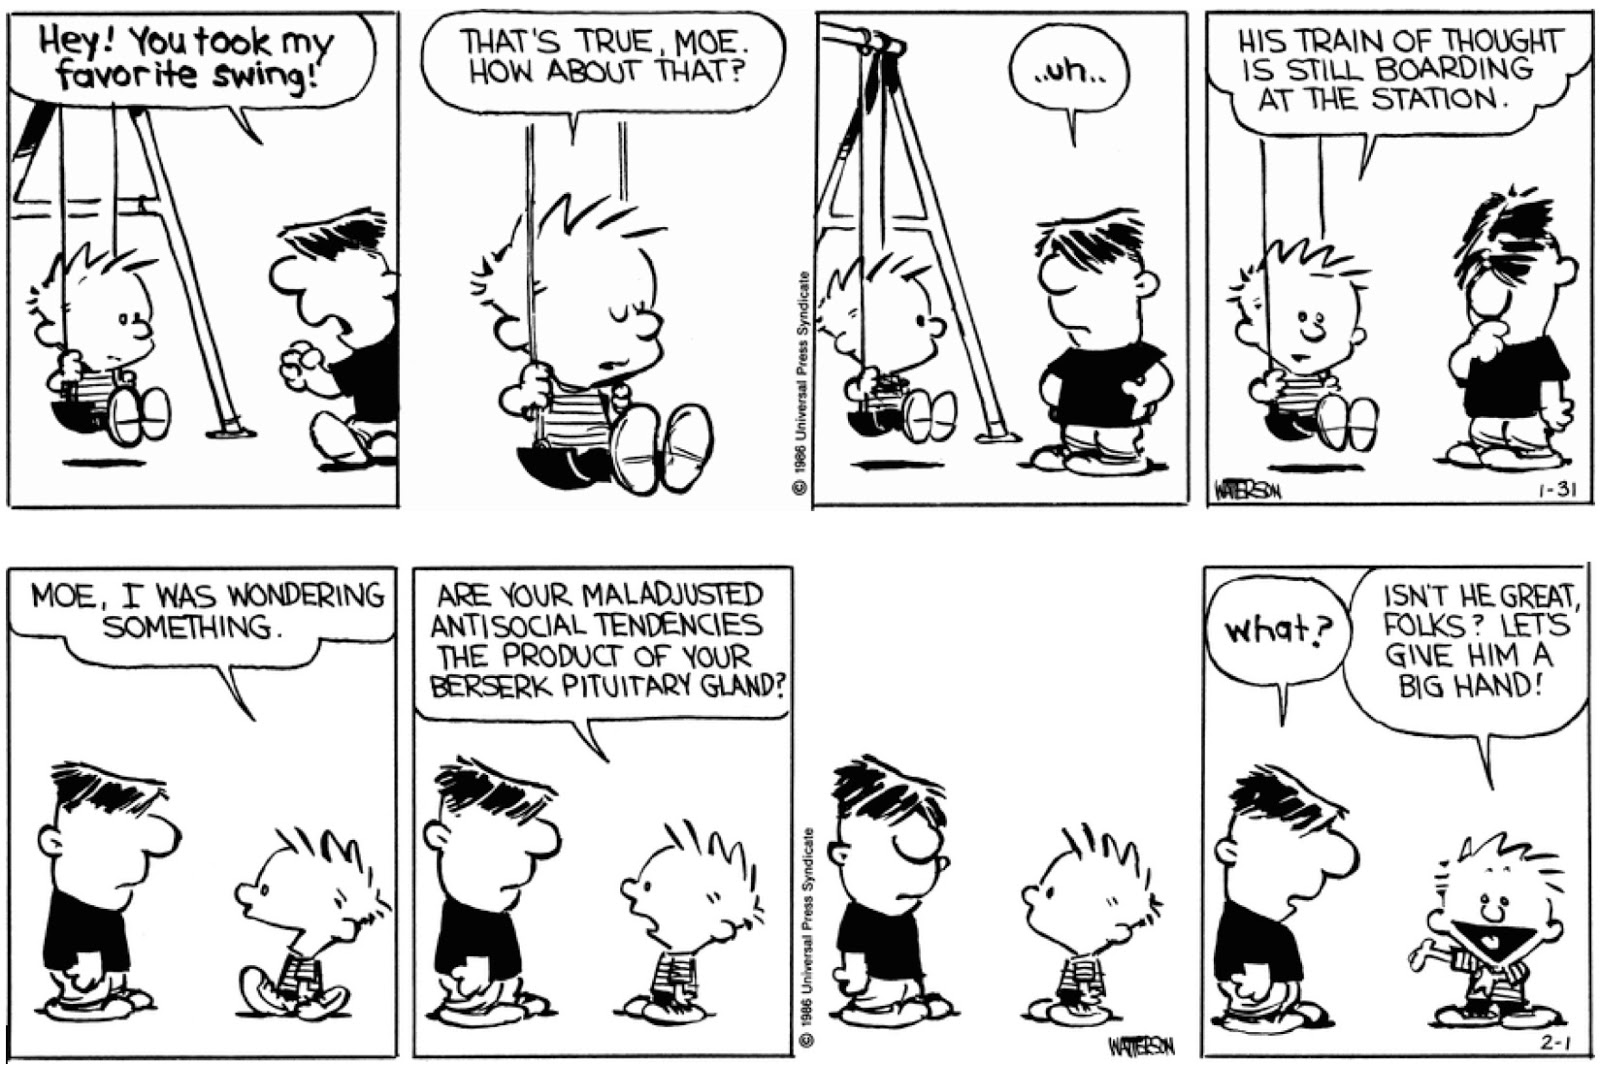 A String Of Upsetting Calvin & Hobbes Strips Told A Bold Story About Bullying